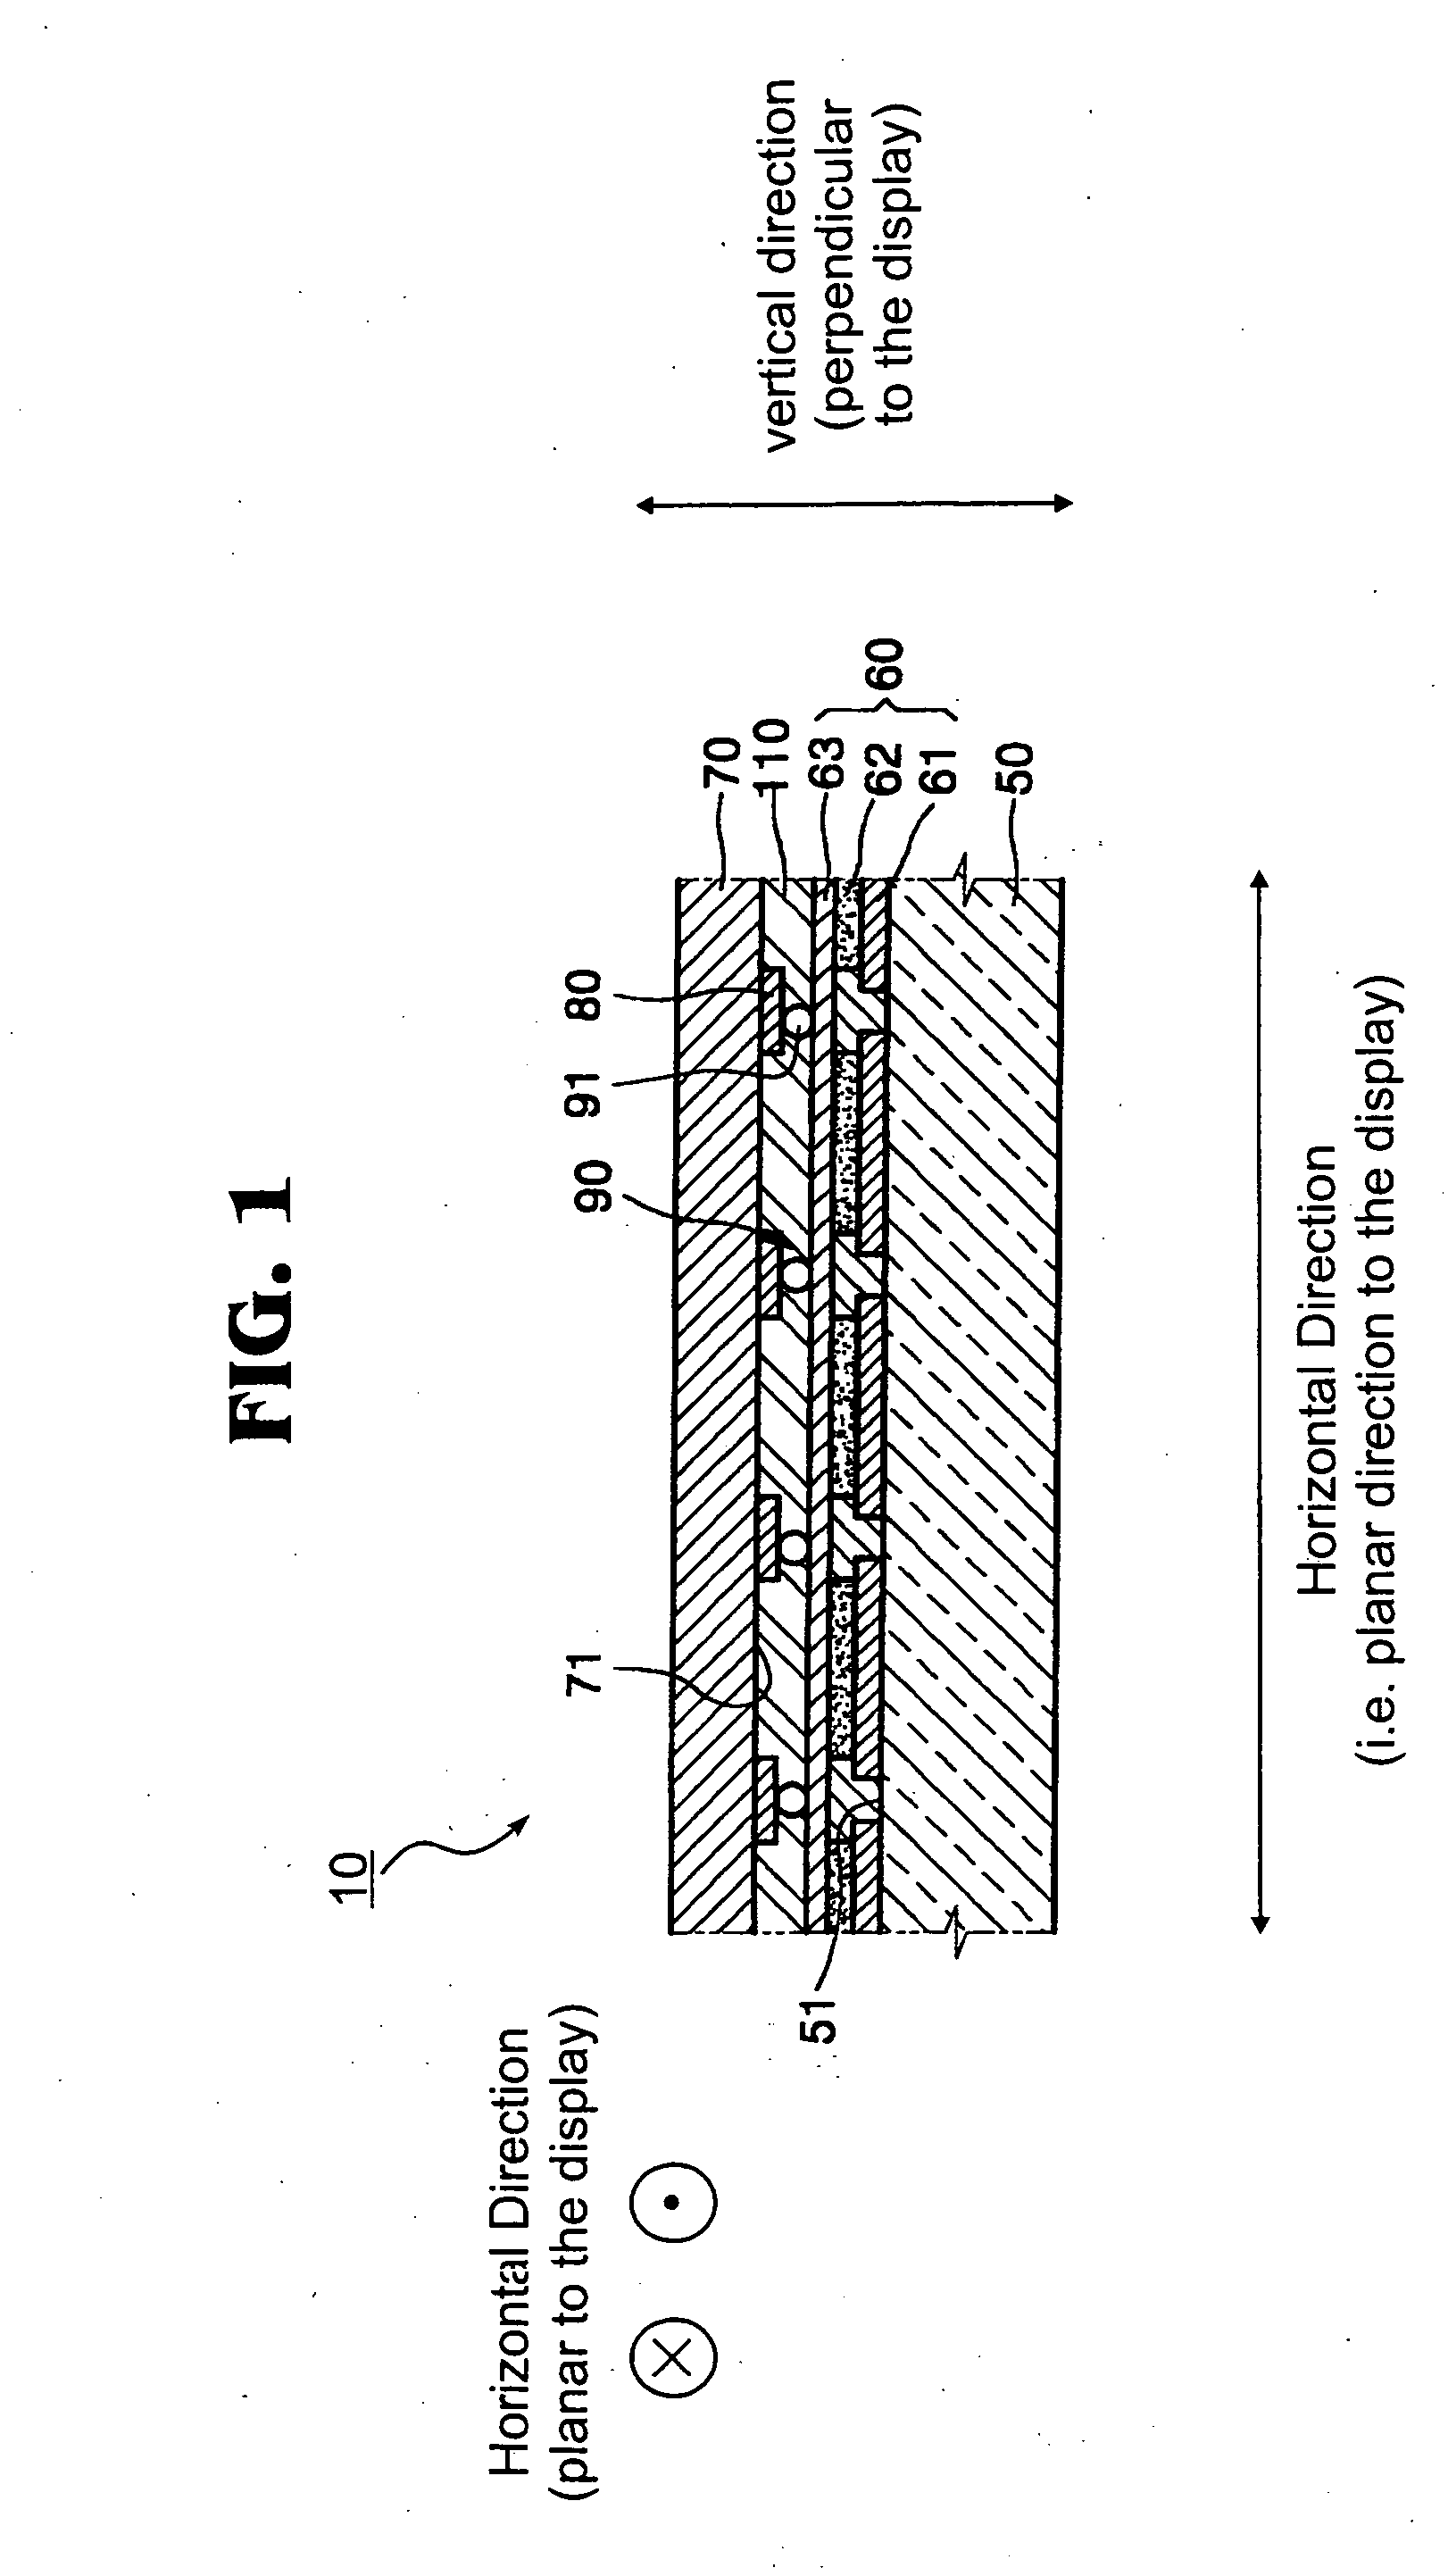 Electrical conductors in an electroluminescent display device